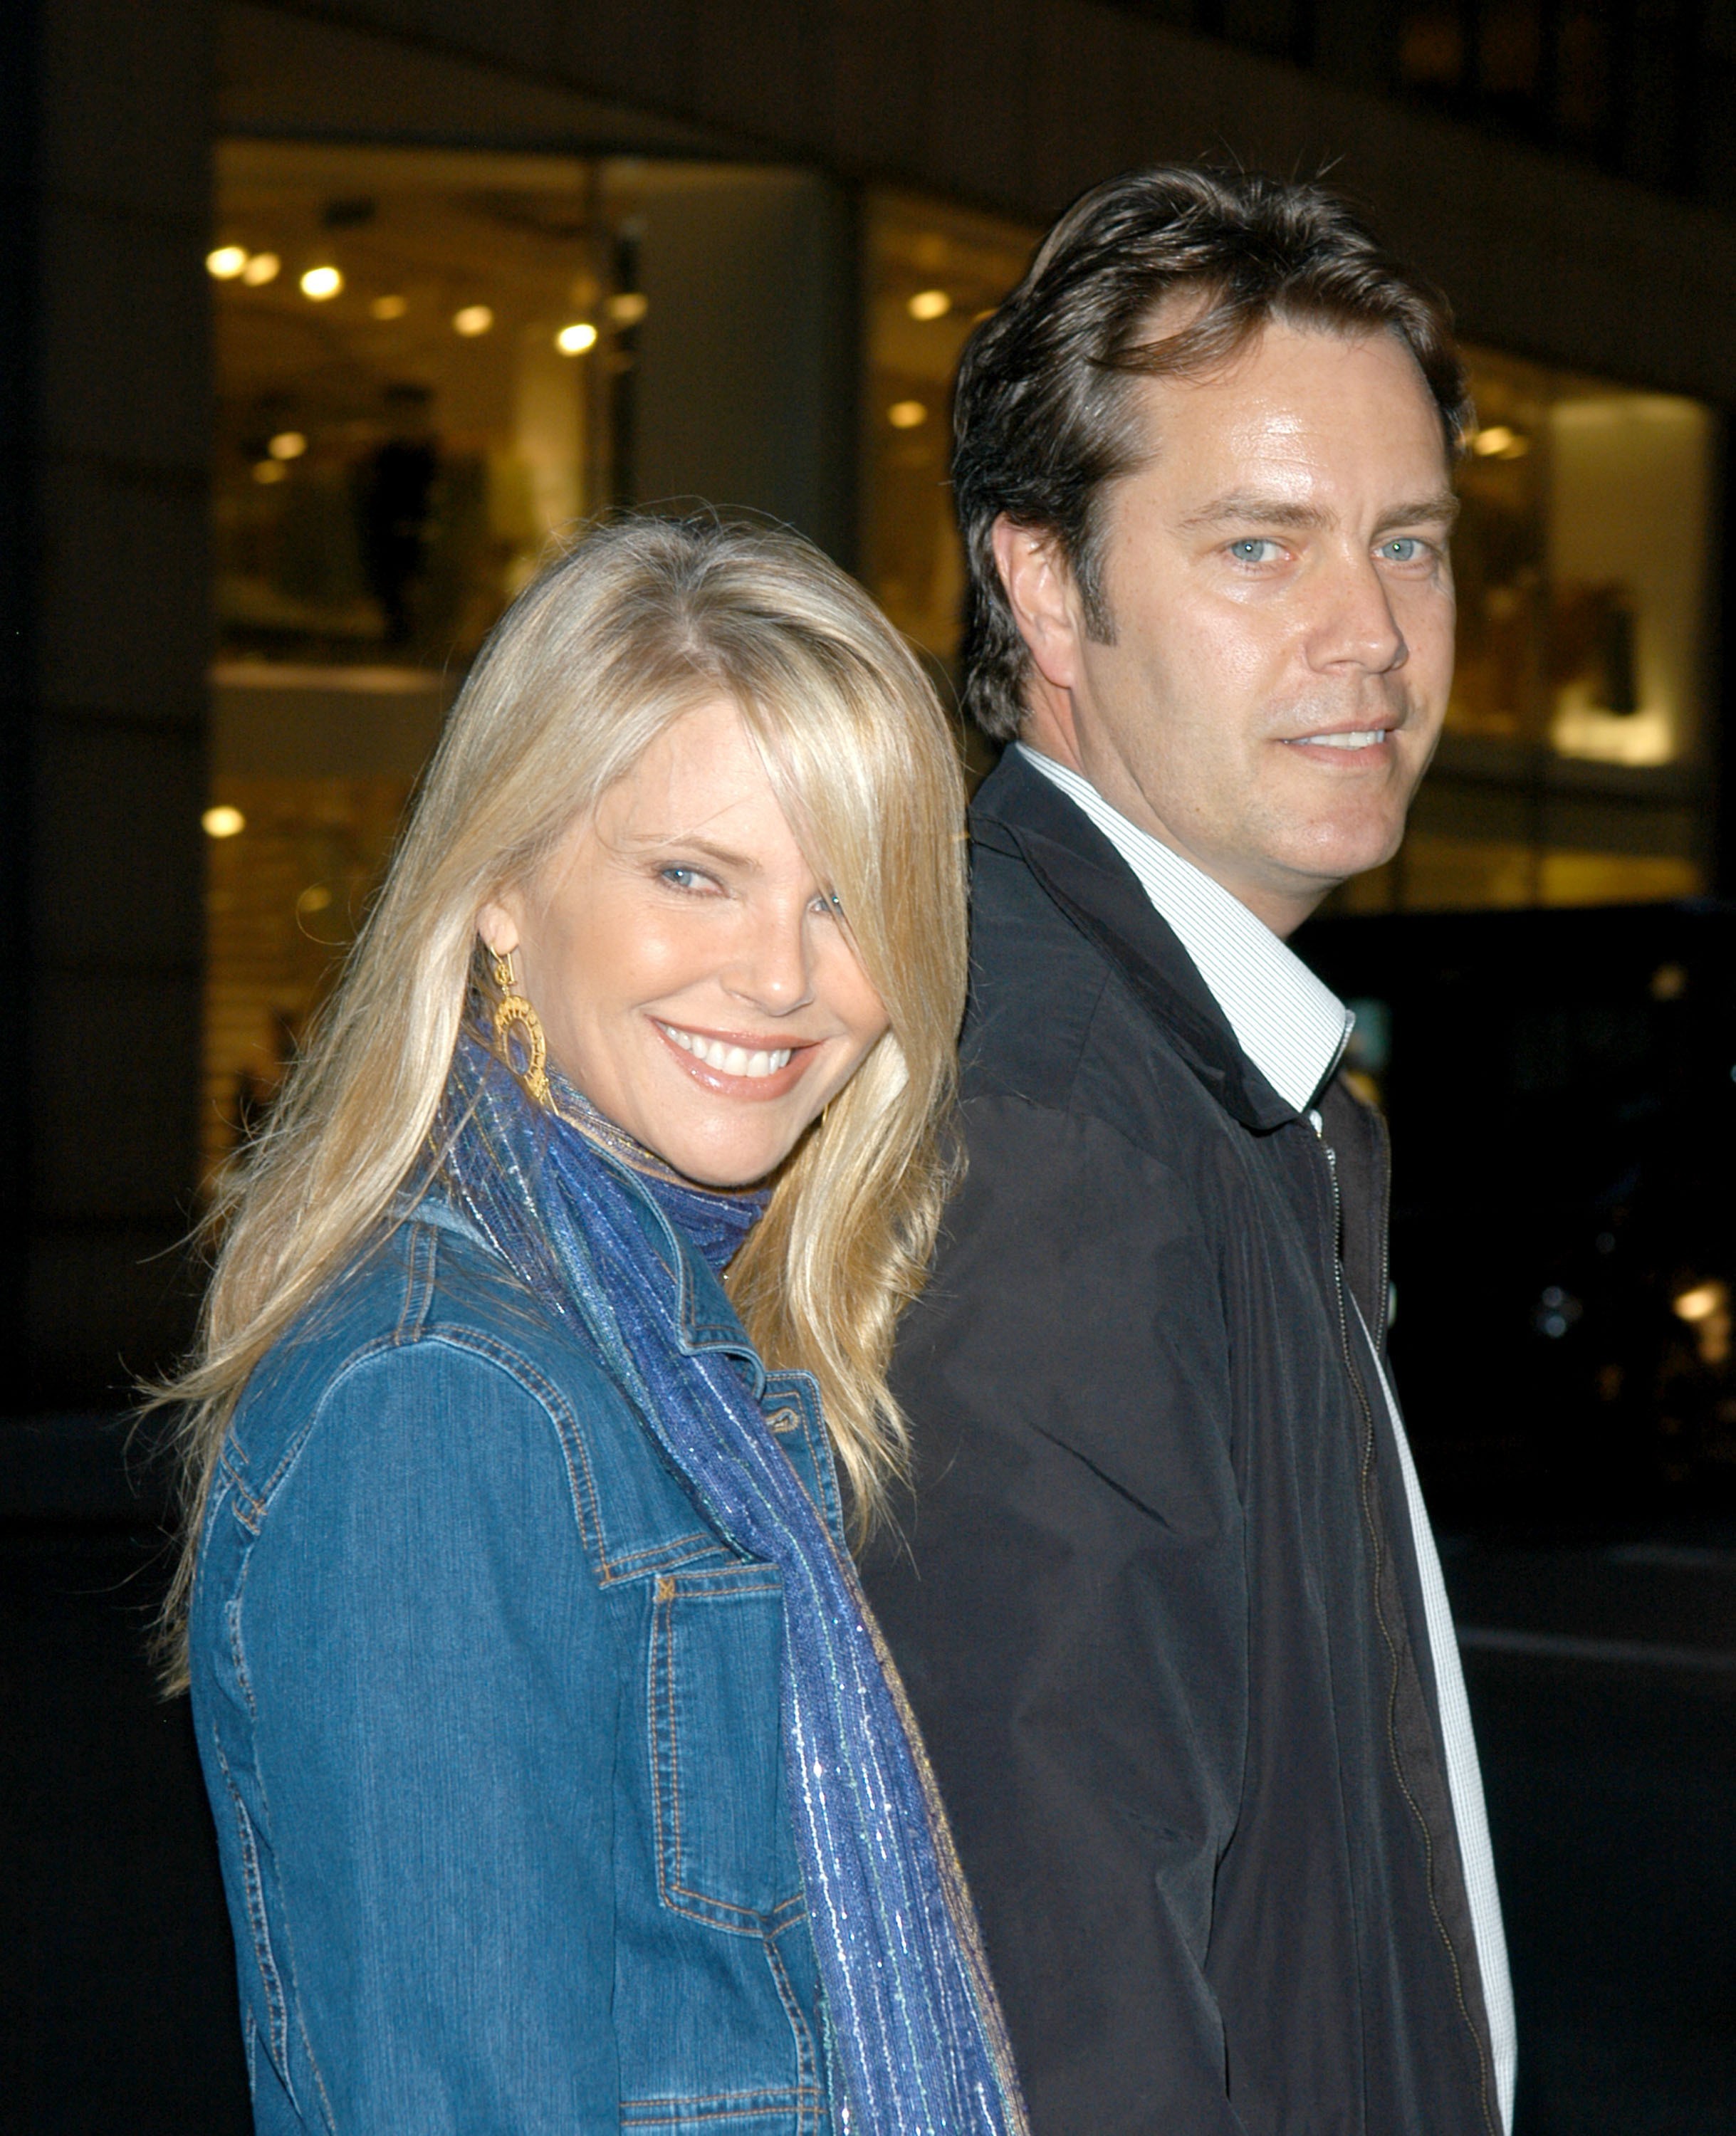 <p>Who in their right mind would cheat on a gorgeous supermodel?! Peter Cook, that's who! Christie Brinkley's marriage came to a screeching halt in 2007 when it was revealed that her husband was carrying on an affair with office clerk Diana Bianchi, who was 18 at the time. The couple became engaged in a bitter battle over money, as well as custody of their daughter, Sailor Brinkley-Cook. The divorce was eventually finalized in 2008, and Christie vowed to never remarry.</p>